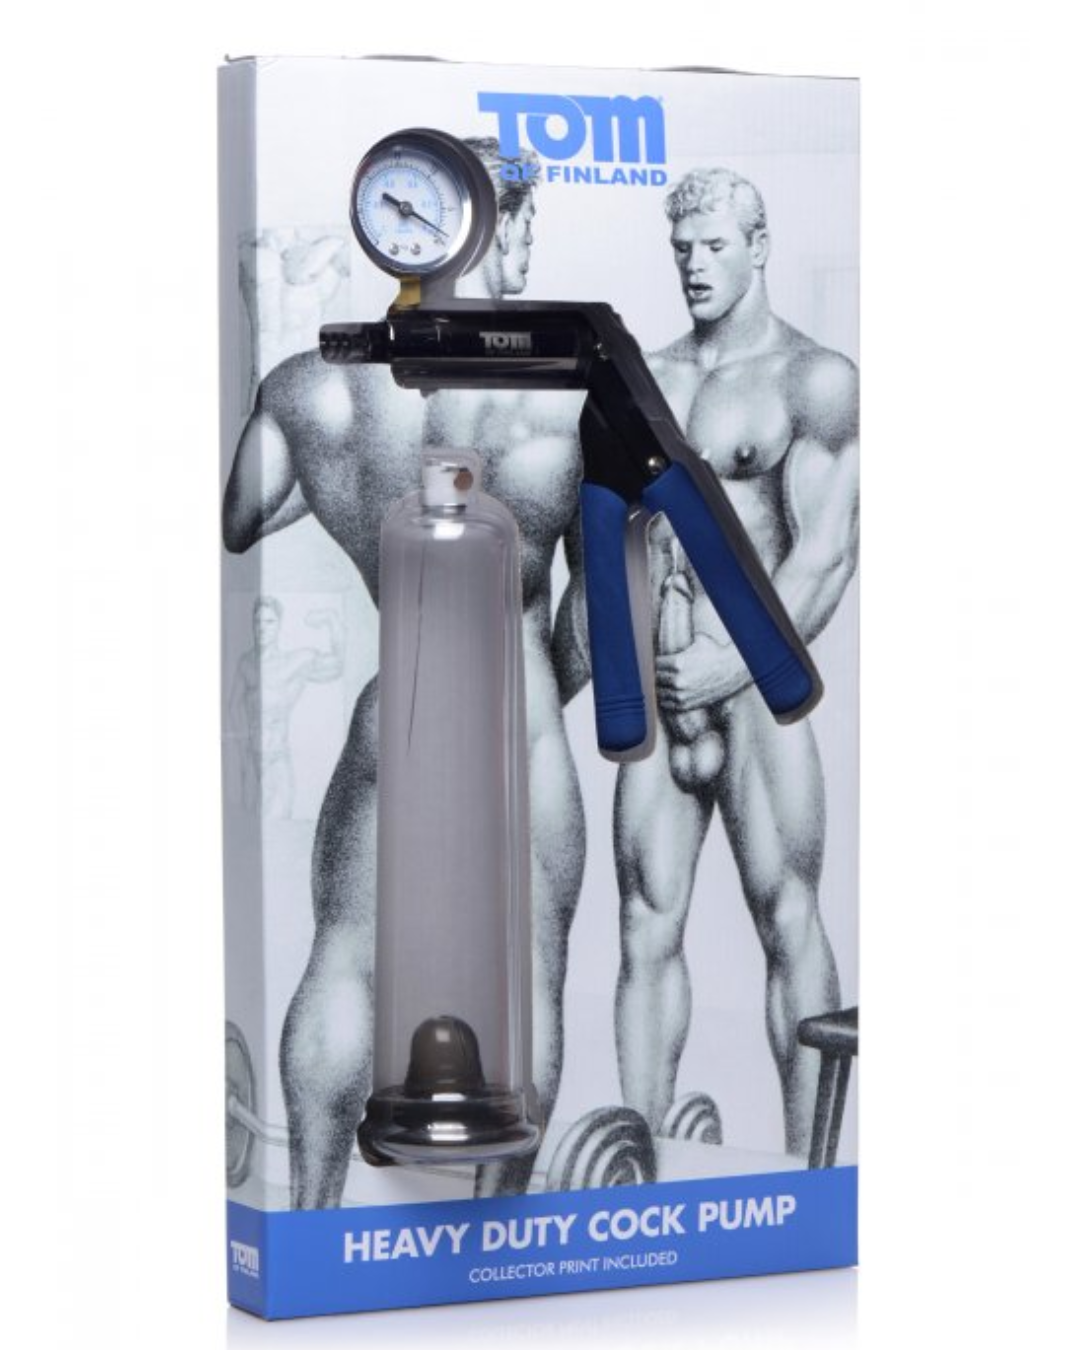 Tom Of Finland Heavy Duty Cock Pump package